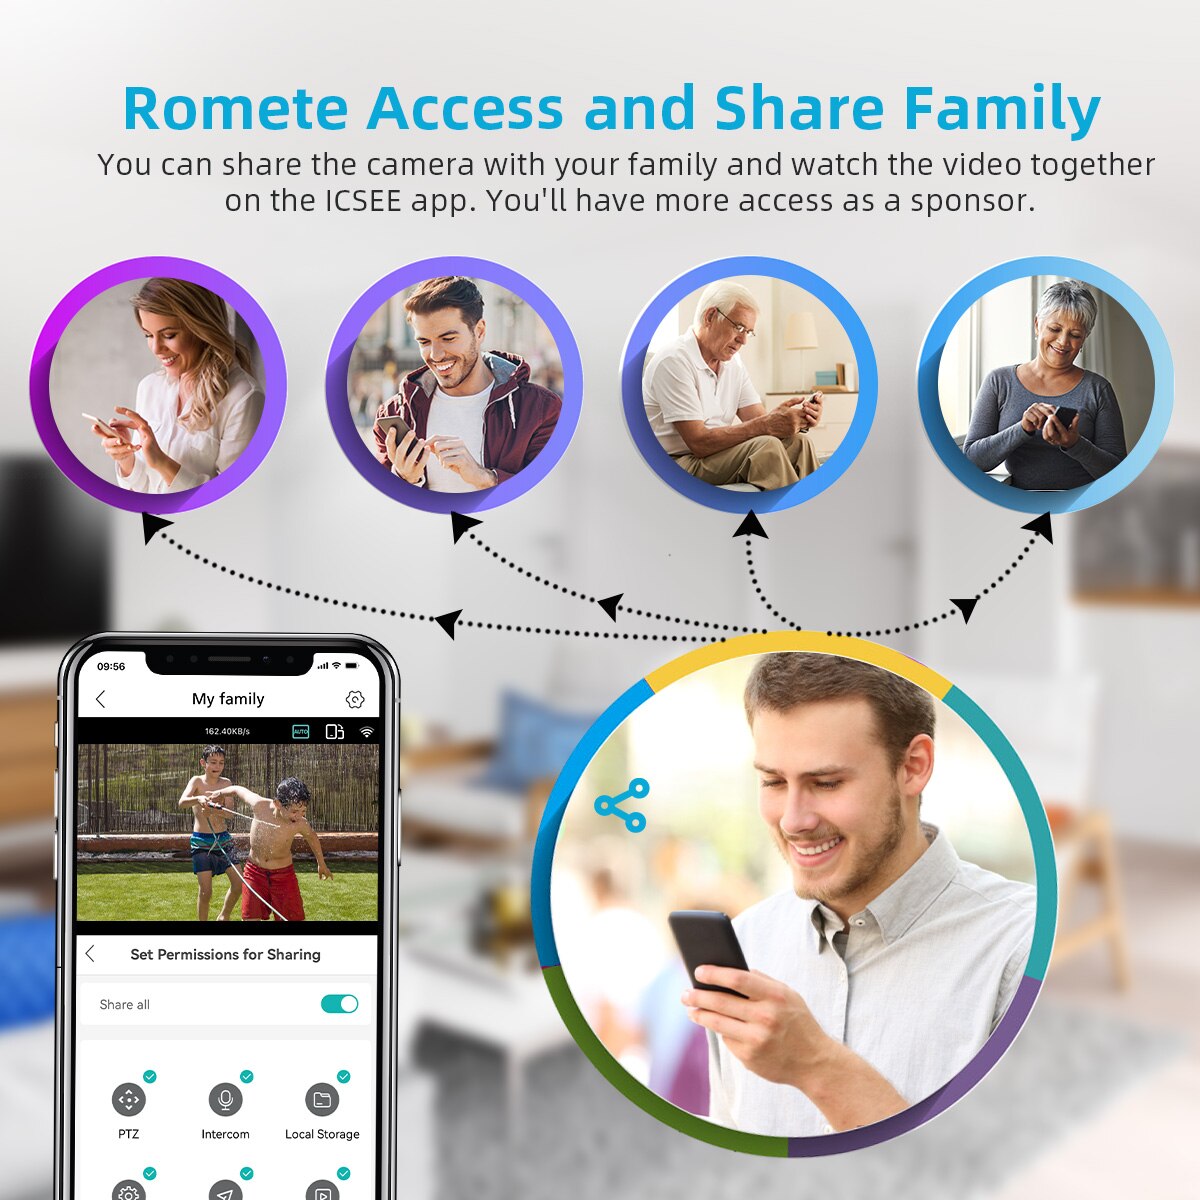 4MP PTZ Solar Camera, Romete Access and Share Family You'll have more access as